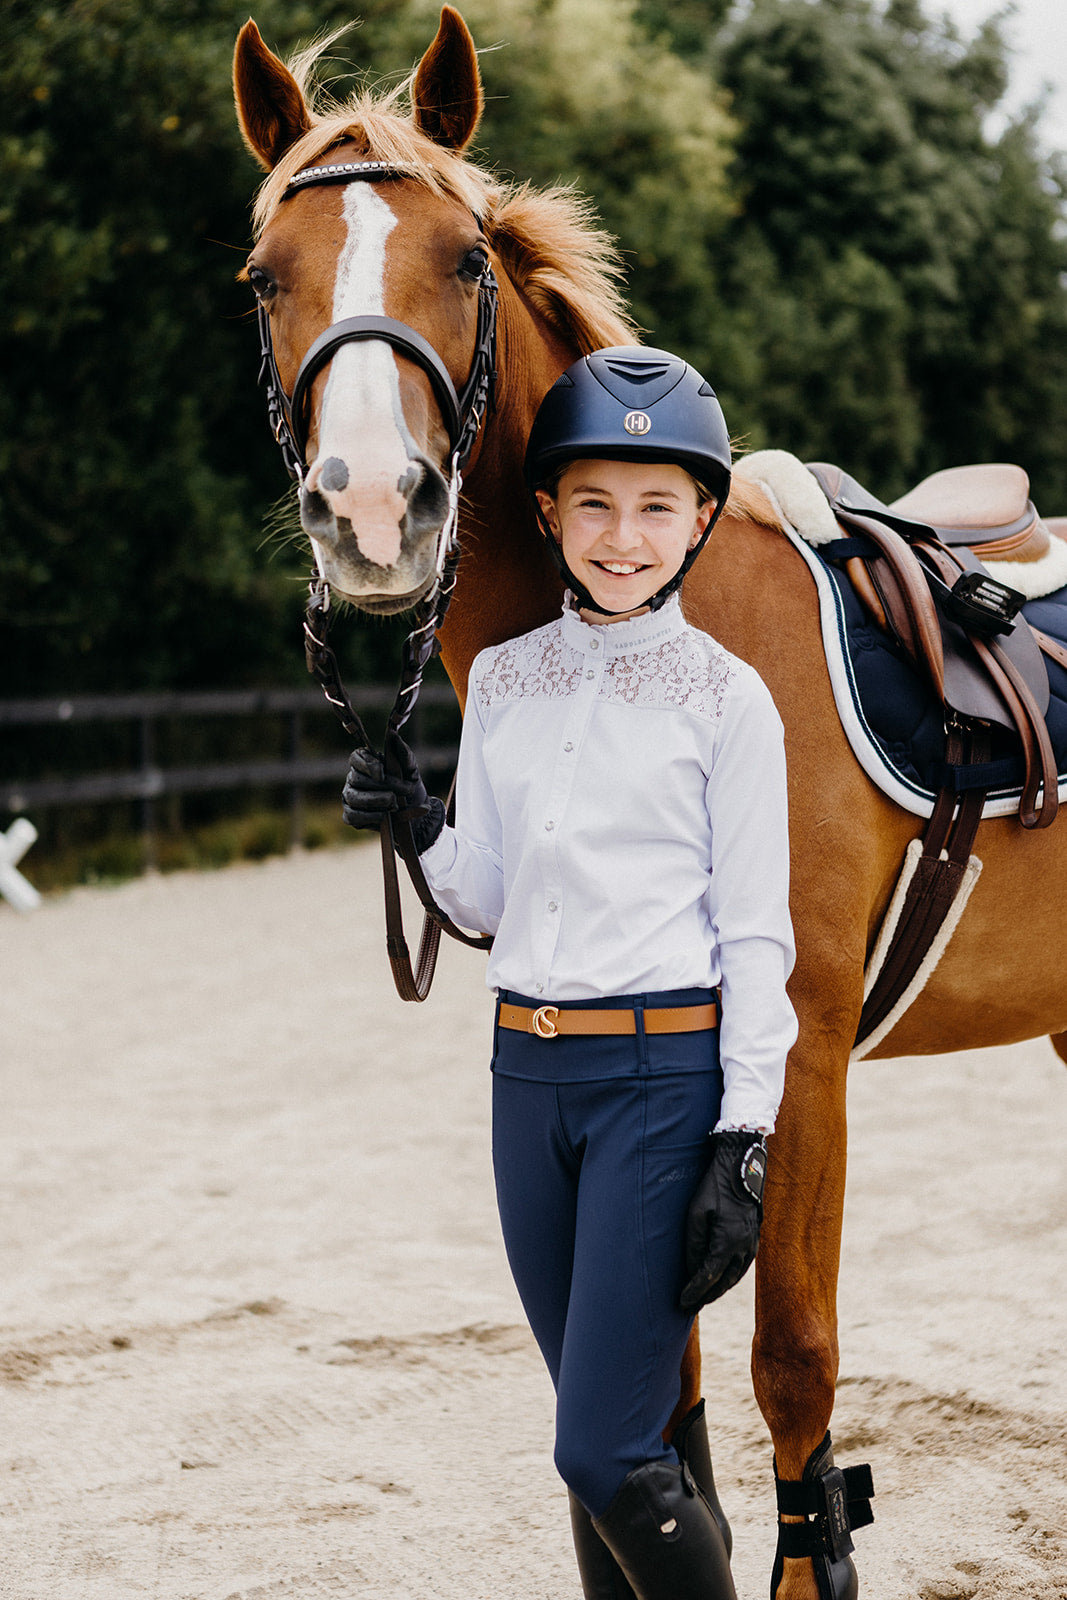 Horse riding clothing & equestrian apparel for riders